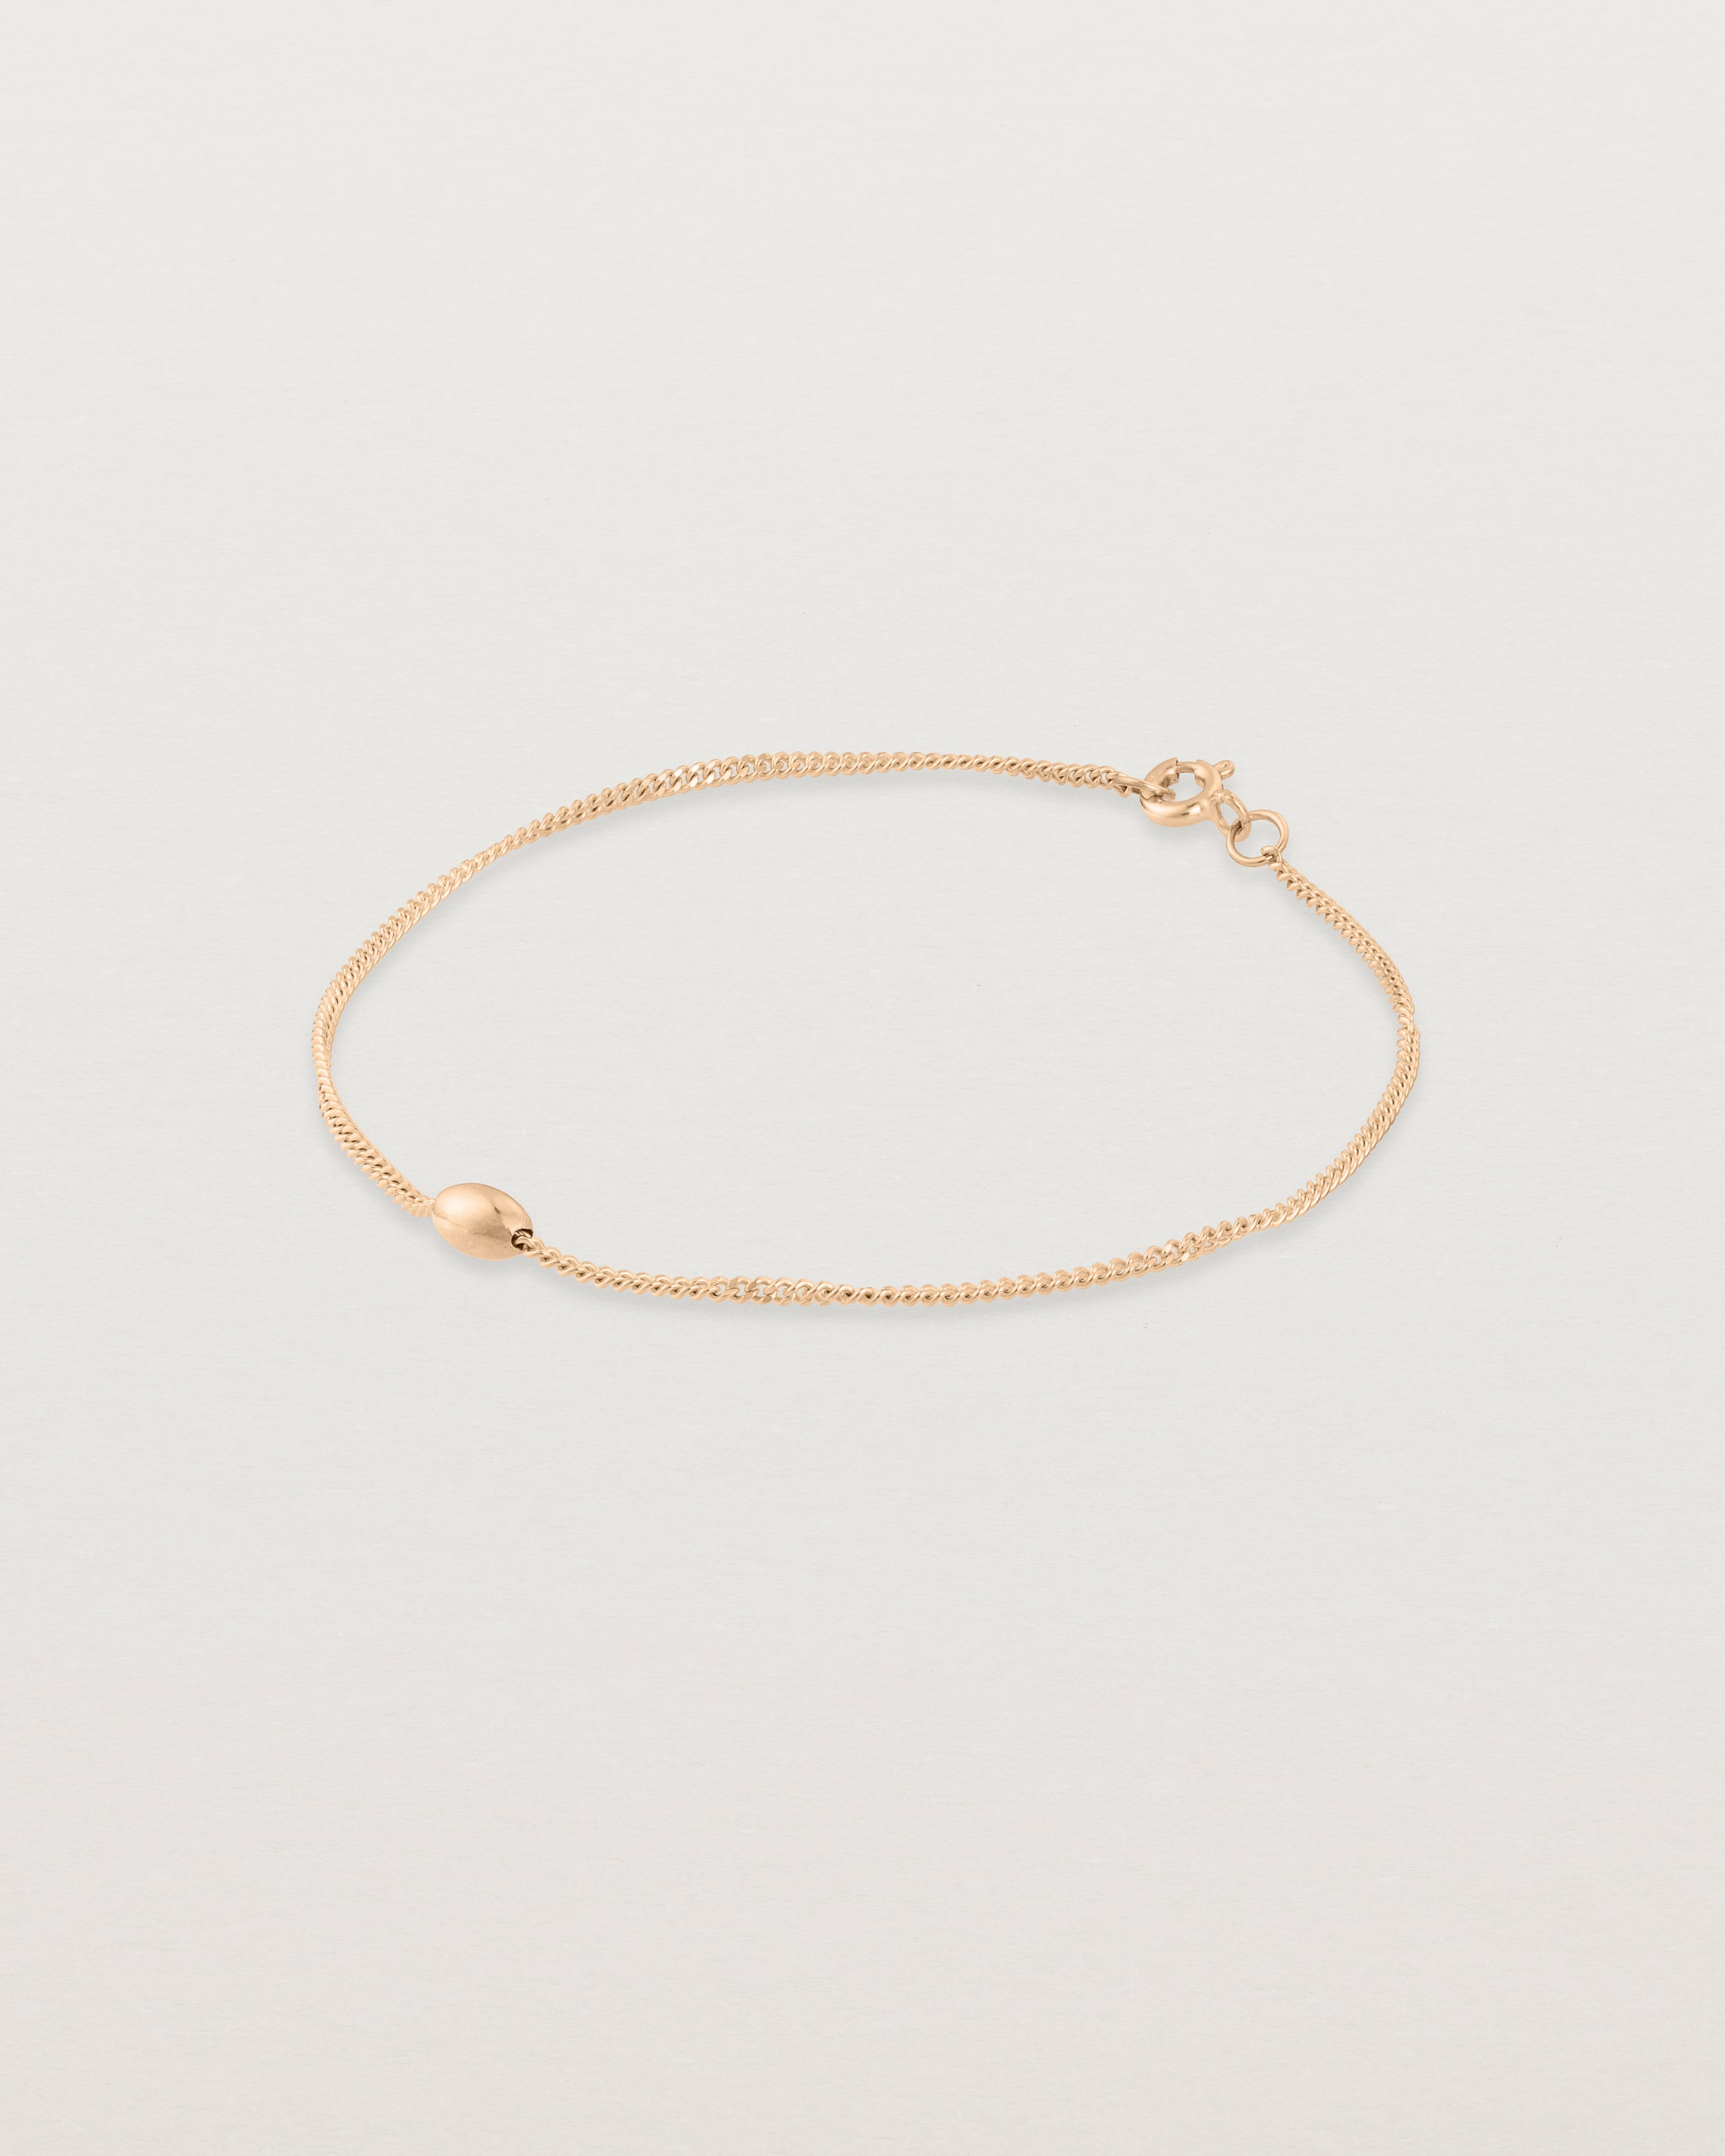 Side view of Sonder bracelet in rose gold showing one charm